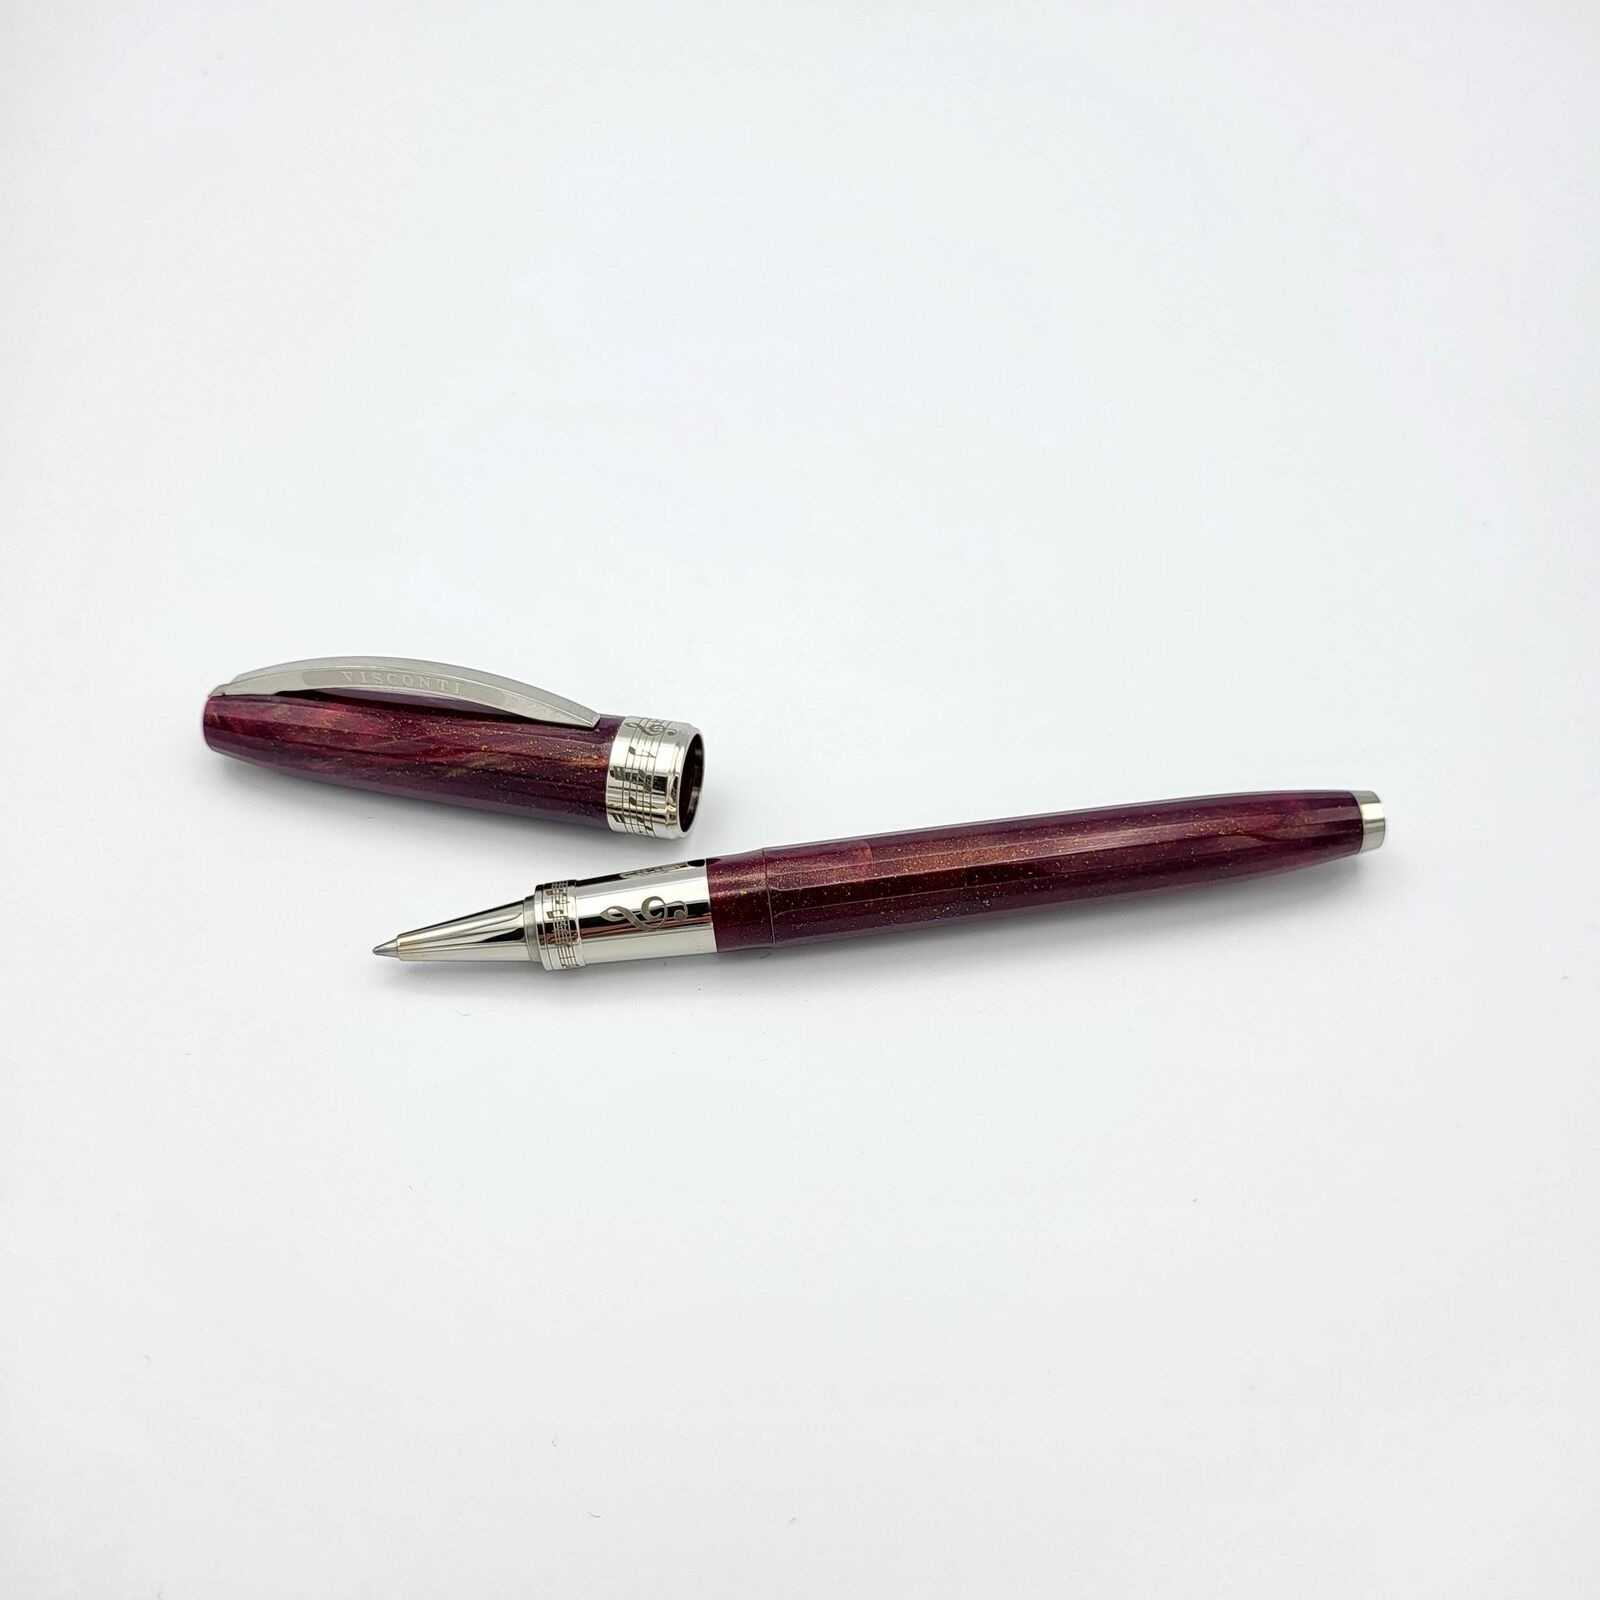 Visconti Hall of Music Sparkling Burgundy Roller Ball -  Rare Collector's Item